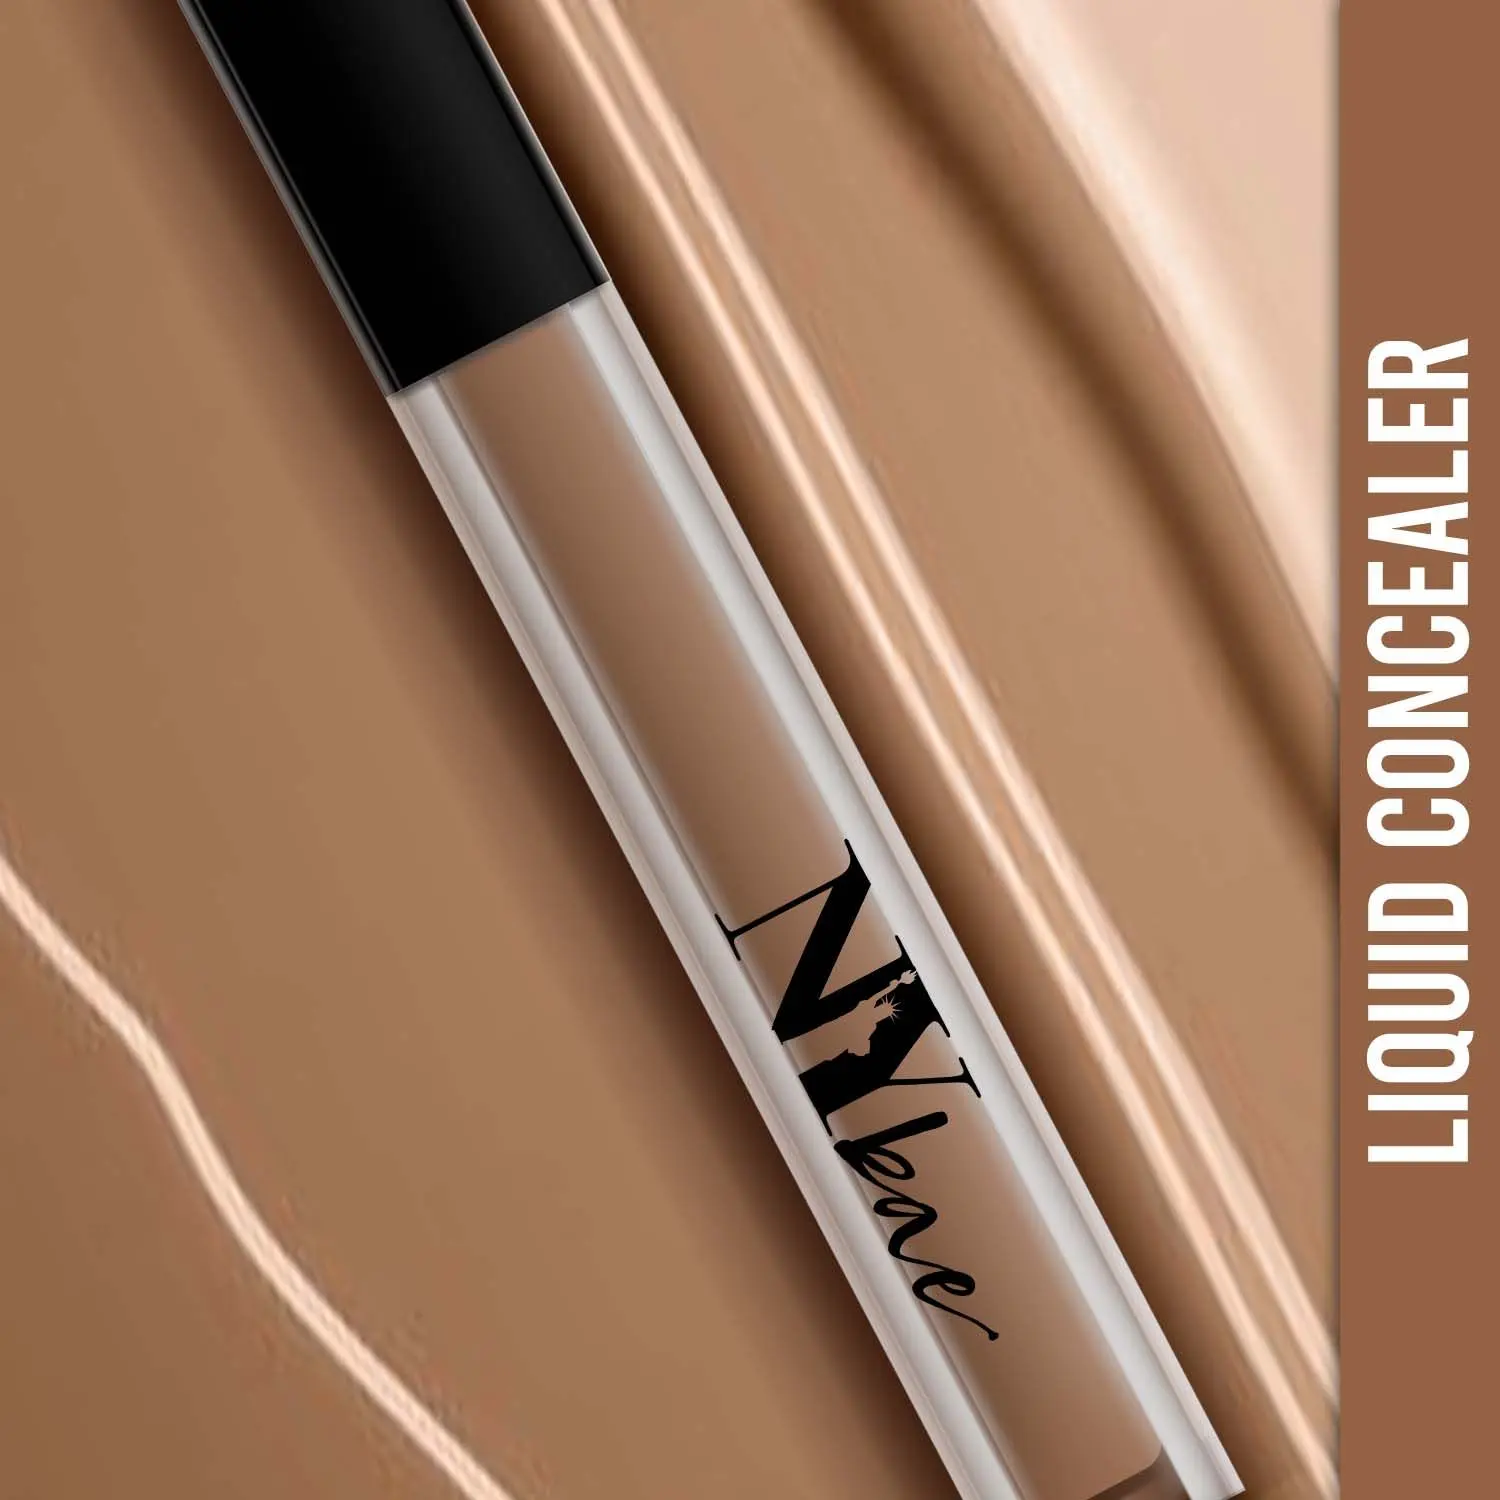 NY Bae Conceal & Conquer Liquid Concealer - Hot Chocolate 08 (4 ml) | Dark Skin | Hides Imperfections | Full Coverage | Long Wear | Water Resistant